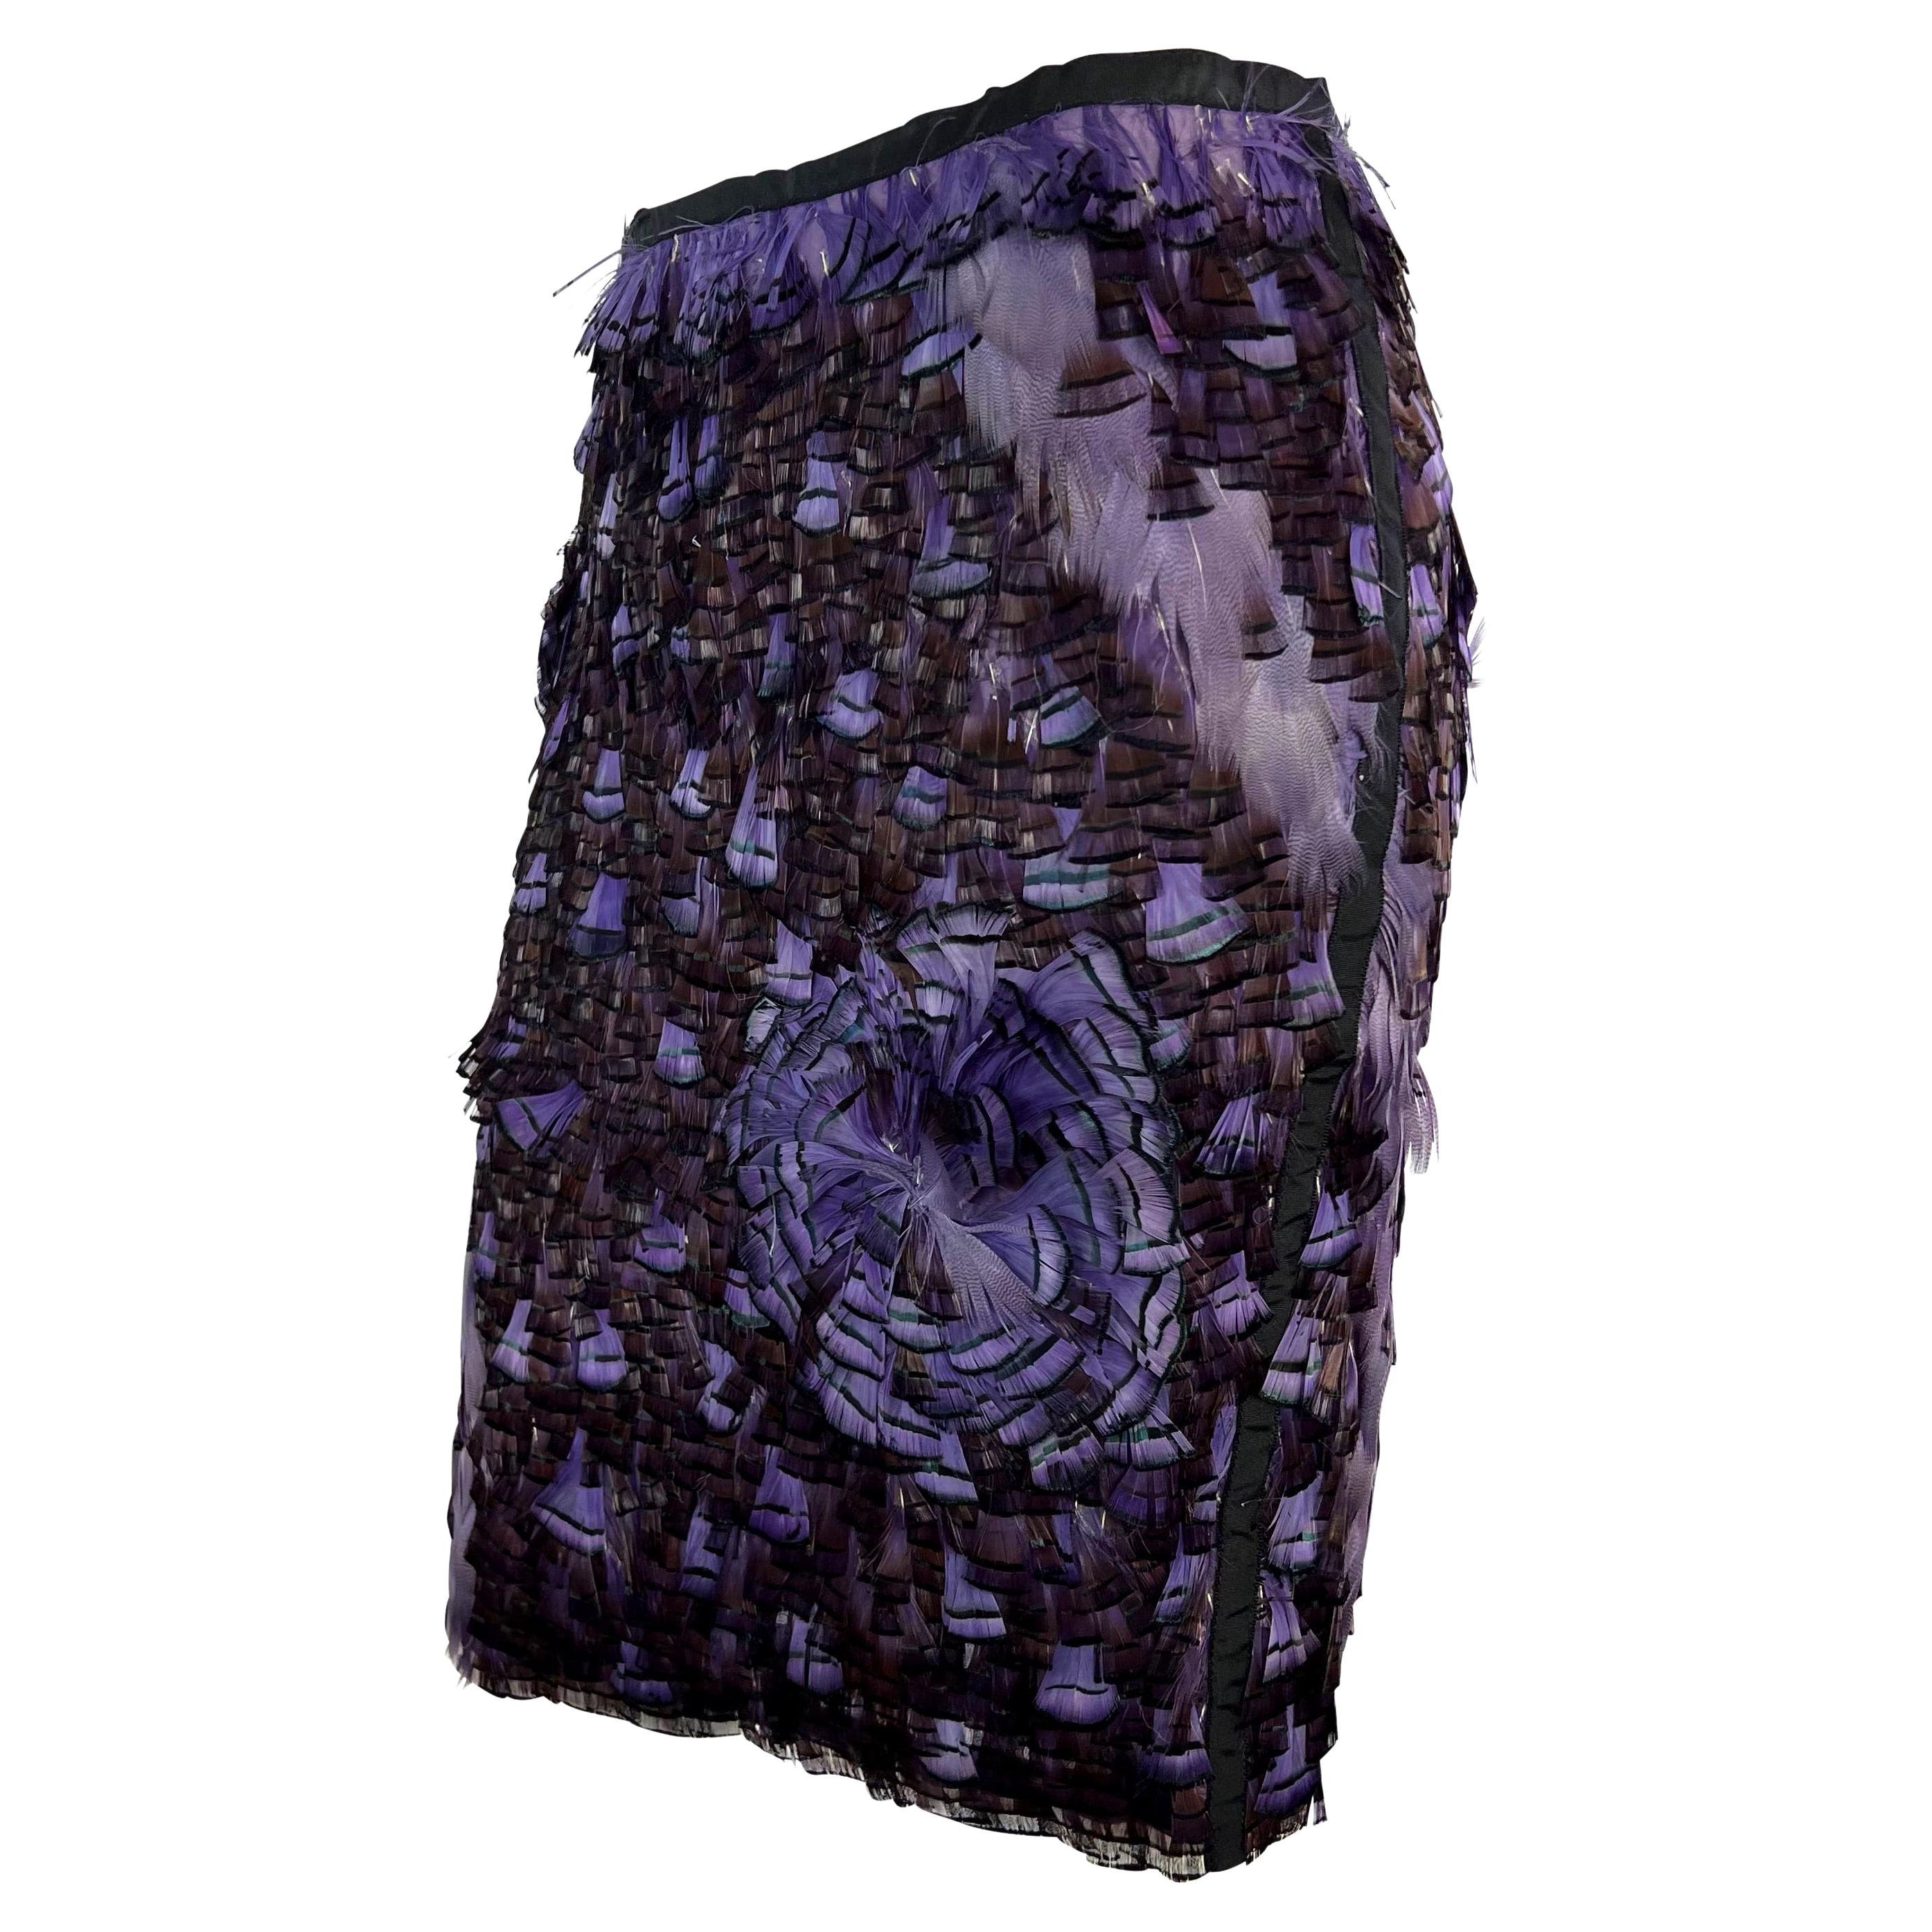 Presenting an incredible purple Gucci feathered skirt, designed by Tom Ford. From the Spring/Summer 2003 collection, this incredibly rare skirt was not featured on the runway but features similar feathers to other pieces that were. The skirt uses